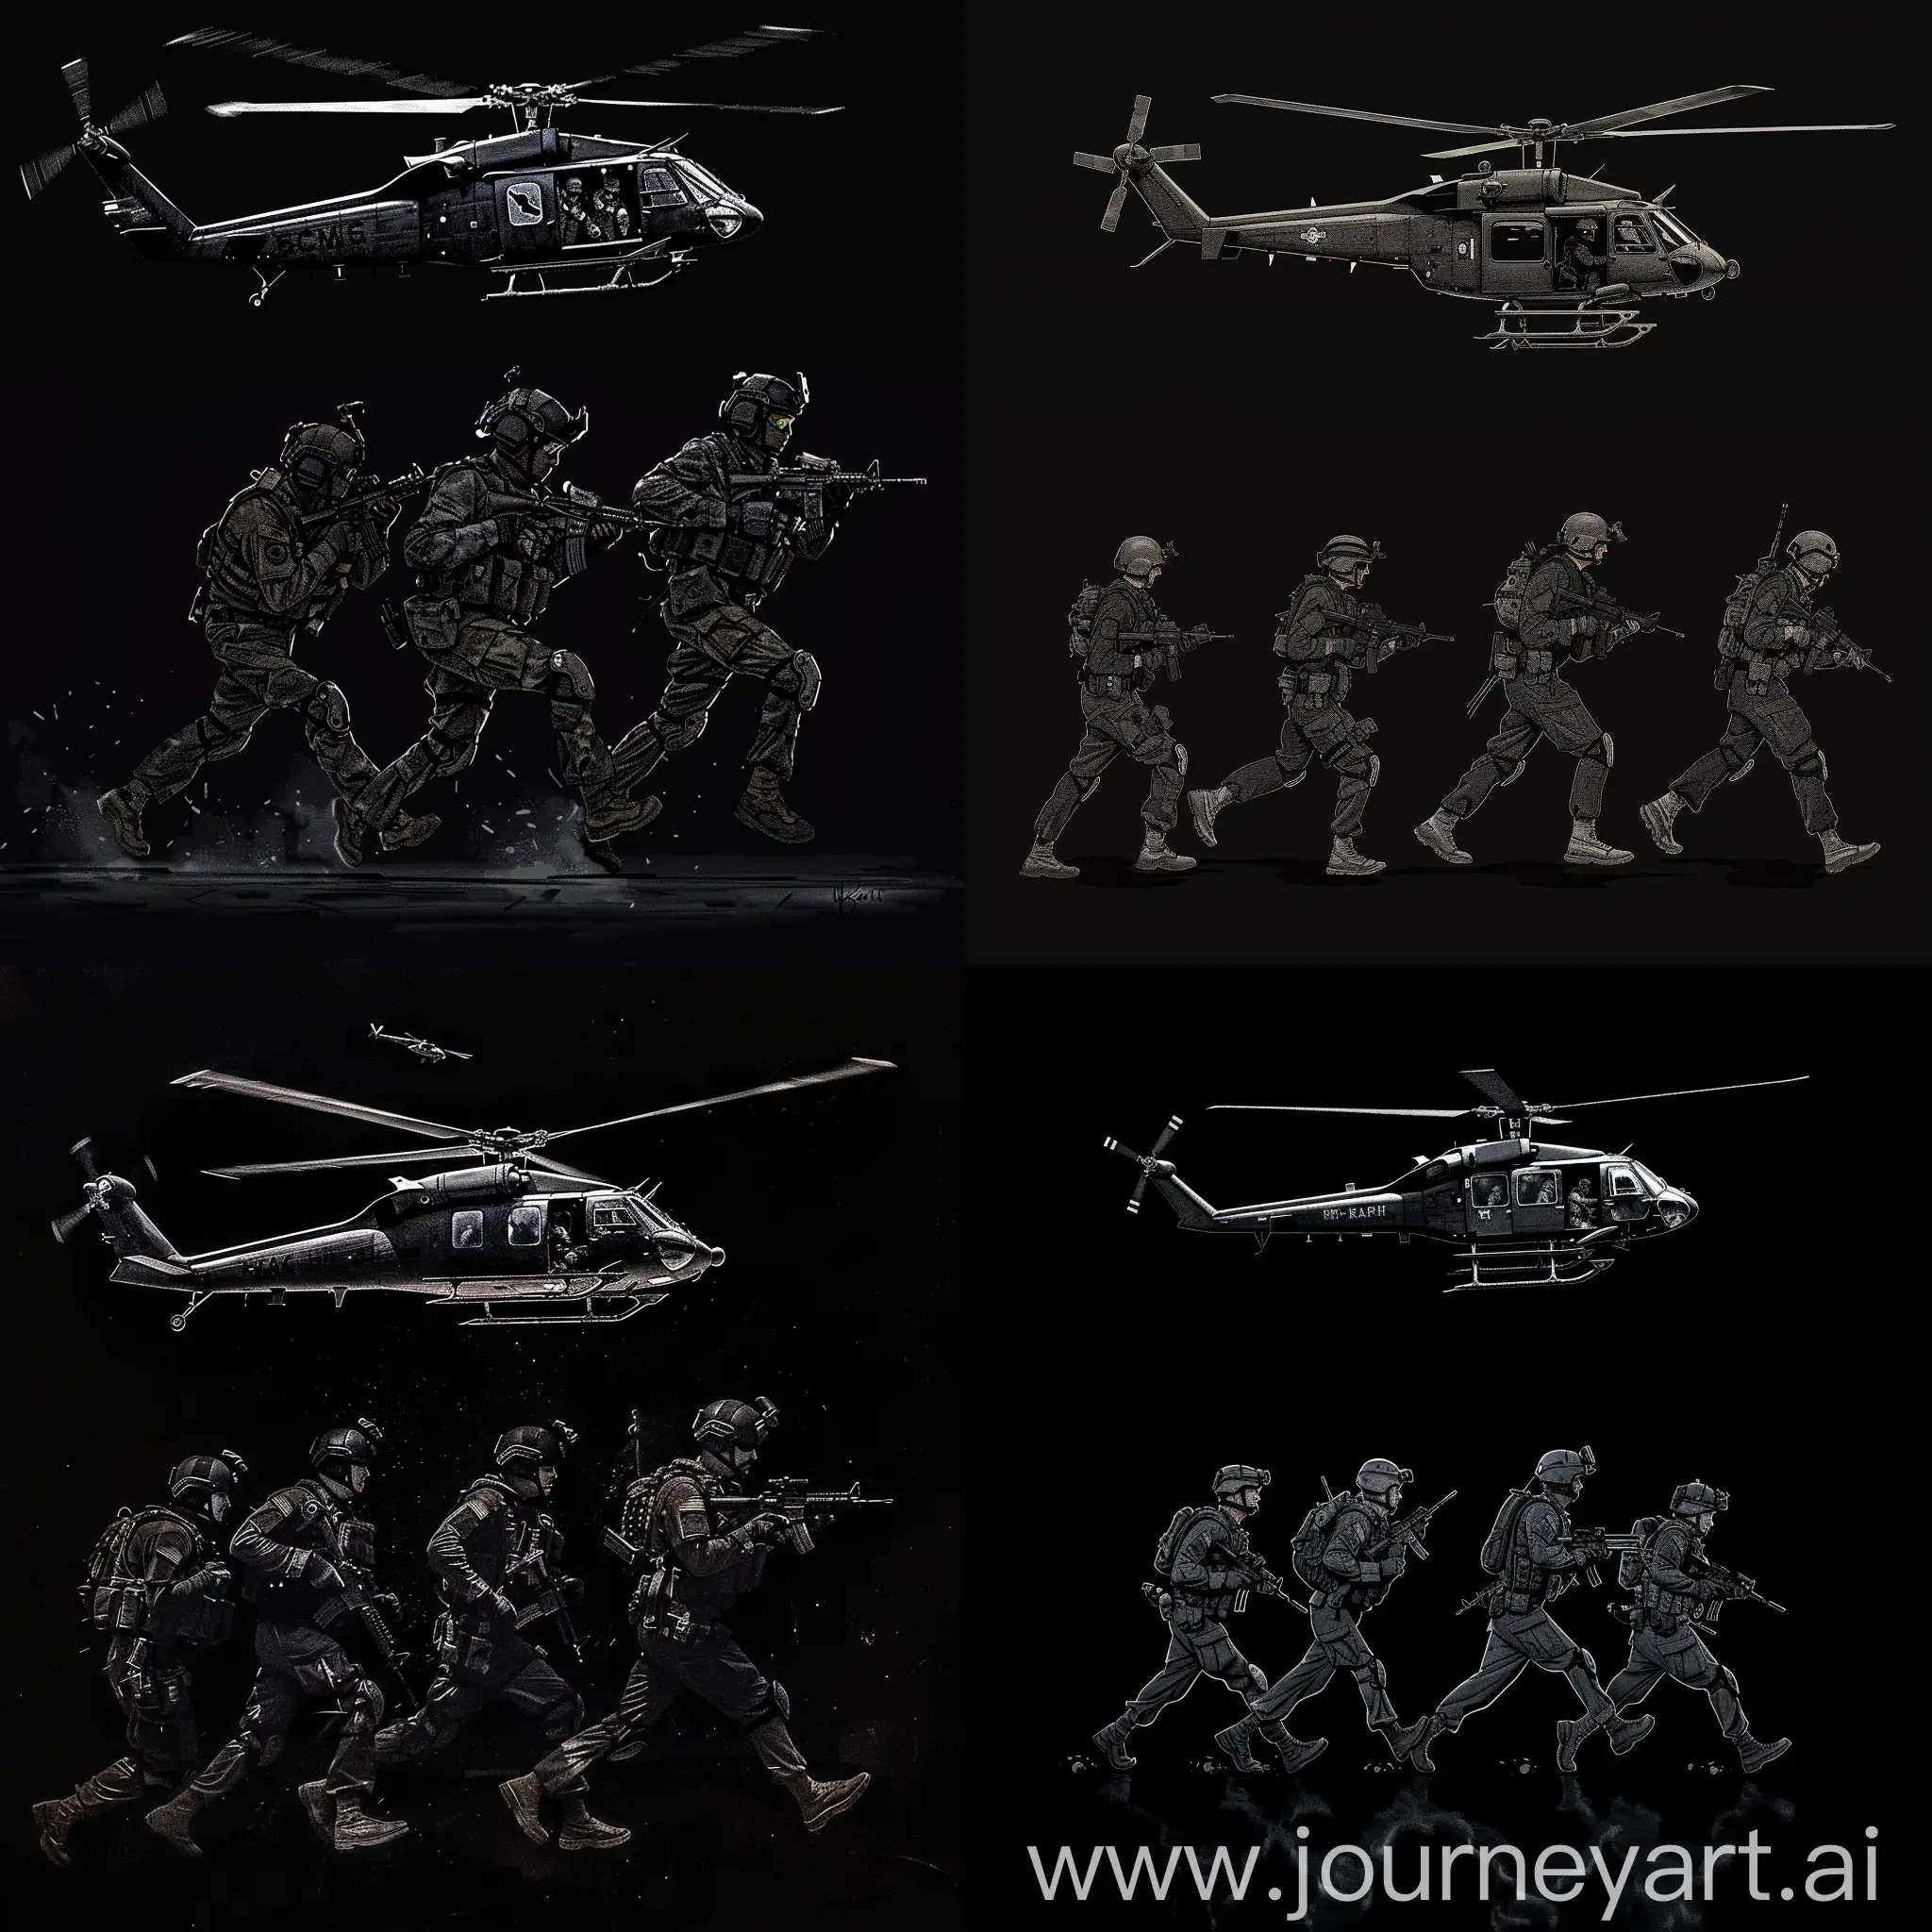 Stealthy-Black-Ops-Soldiers-and-Helicopter-in-Night-Mission